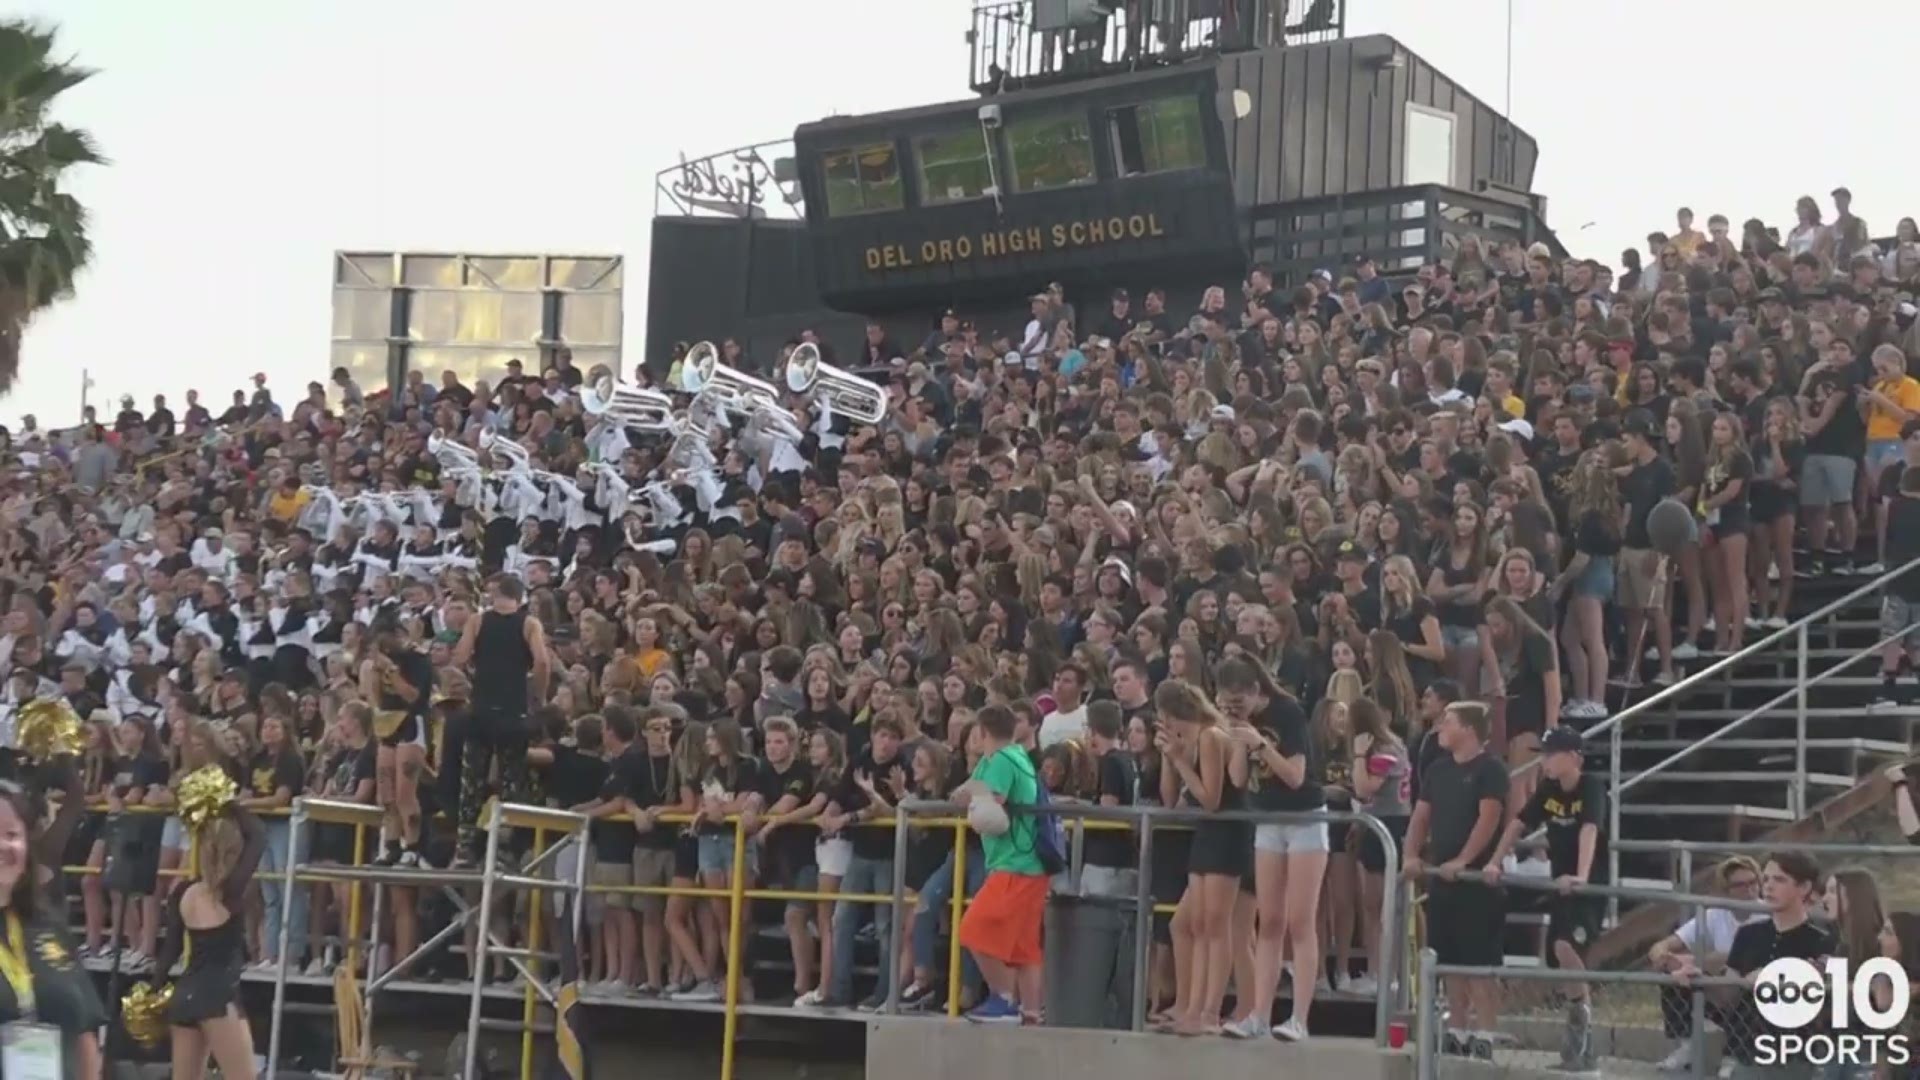 The Del Oro Golden Eagles open up their season with a 32-19 win at home over Chico's Pleasant Valley Vikings. The Del Oro defense came up with big plays in the first half, including a pick-six by junior QB/FS Kal Lunders, in addition to lighting up the scoreboard in Loomis during Week 0.